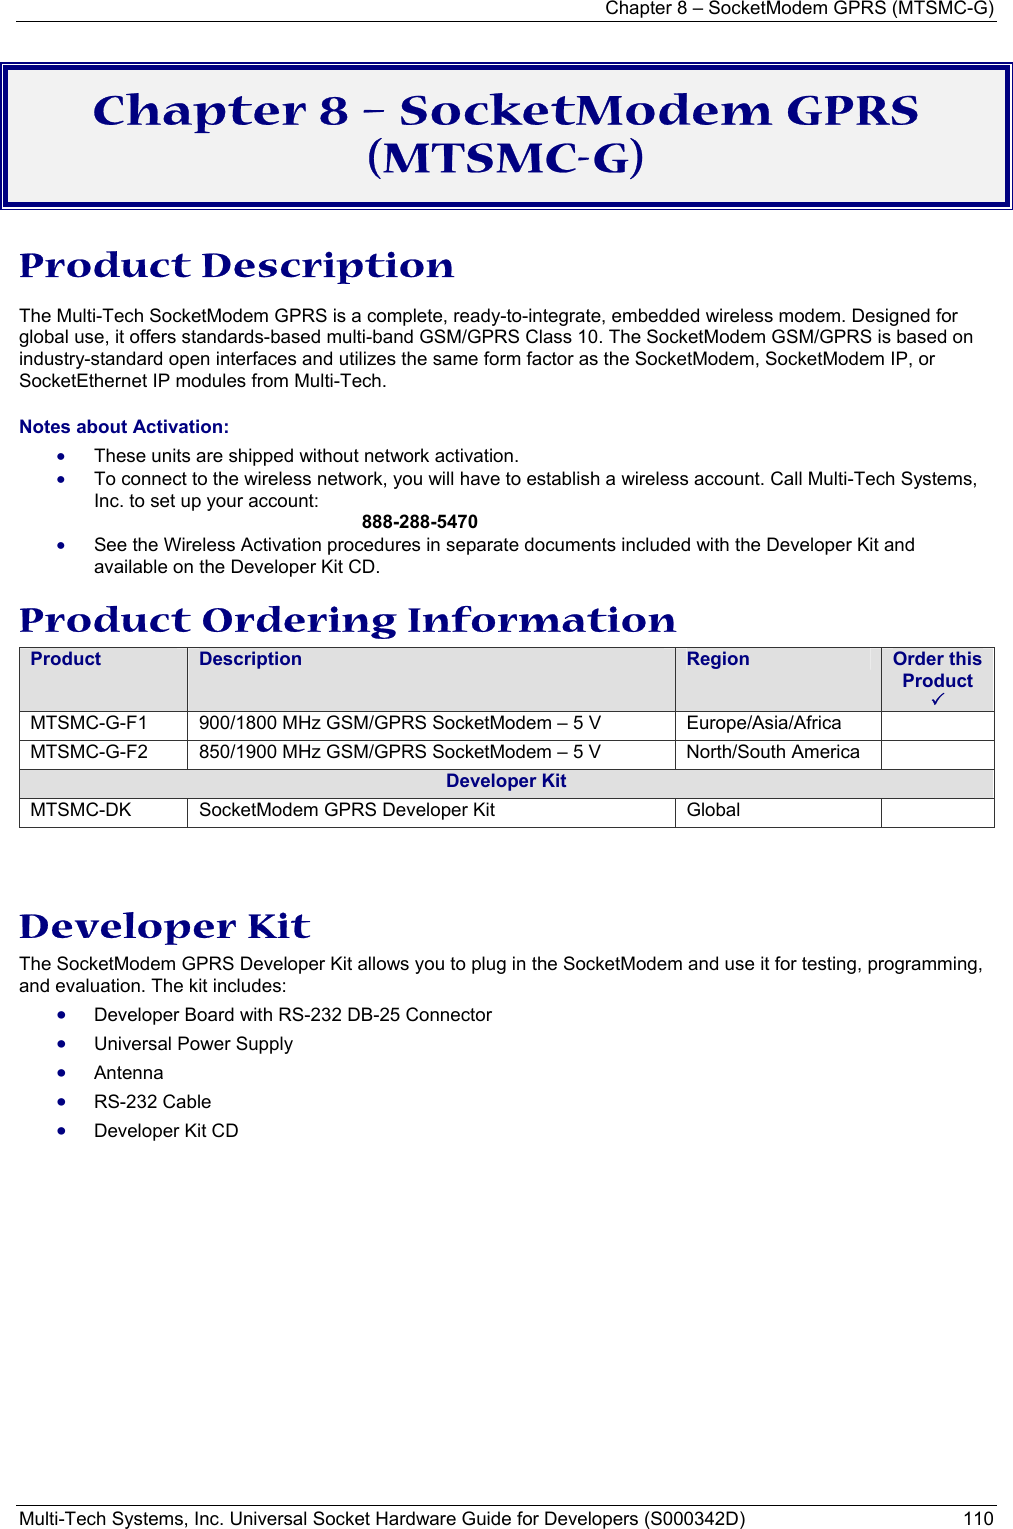 Chapter 8 – SocketModem GPRS (MTSMC-G) Multi-Tech Systems, Inc. Universal Socket Hardware Guide for Developers (S000342D)  110  Chapter 8 – SocketModem GPRS (MTSMC-G)  Product Description The Multi-Tech SocketModem GPRS is a complete, ready-to-integrate, embedded wireless modem. Designed for global use, it offers standards-based multi-band GSM/GPRS Class 10. The SocketModem GSM/GPRS is based on industry-standard open interfaces and utilizes the same form factor as the SocketModem, SocketModem IP, or SocketEthernet IP modules from Multi-Tech. Notes about Activation:  • These units are shipped without network activation.  • To connect to the wireless network, you will have to establish a wireless account. Call Multi-Tech Systems, Inc. to set up your account:   888-288-5470 • See the Wireless Activation procedures in separate documents included with the Developer Kit and available on the Developer Kit CD. Product Ordering Information Product  Description  Region  Order this Product 3 MTSMC-G-F1  900/1800 MHz GSM/GPRS SocketModem – 5 V  Europe/Asia/Africa   MTSMC-G-F2  850/1900 MHz GSM/GPRS SocketModem – 5 V  North/South America   Developer Kit MTSMC-DK  SocketModem GPRS Developer Kit  Global     Developer Kit The SocketModem GPRS Developer Kit allows you to plug in the SocketModem and use it for testing, programming, and evaluation. The kit includes: • Developer Board with RS-232 DB-25 Connector  • Universal Power Supply  • Antenna  • RS-232 Cable • Developer Kit CD 